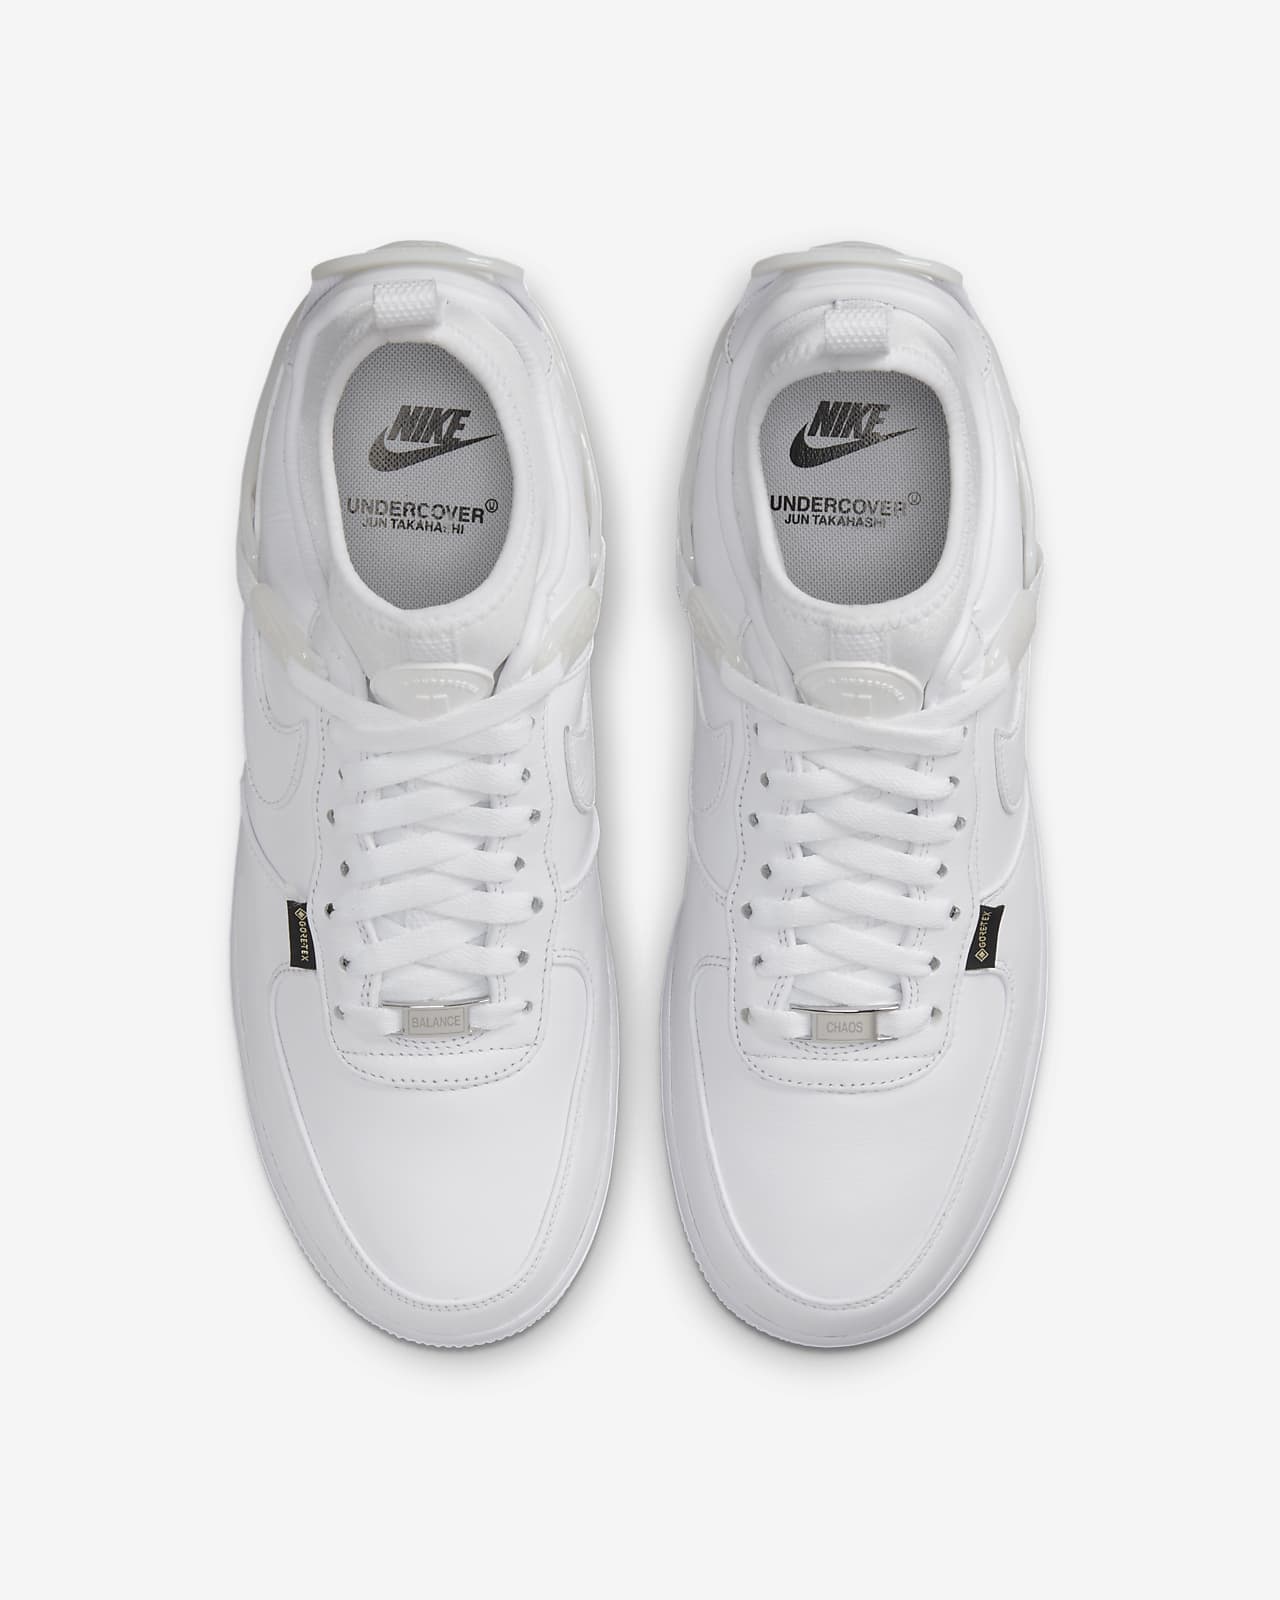 Nike Air Force 1 Low SP x UNDERCOVER Men's Shoes. Nike DK